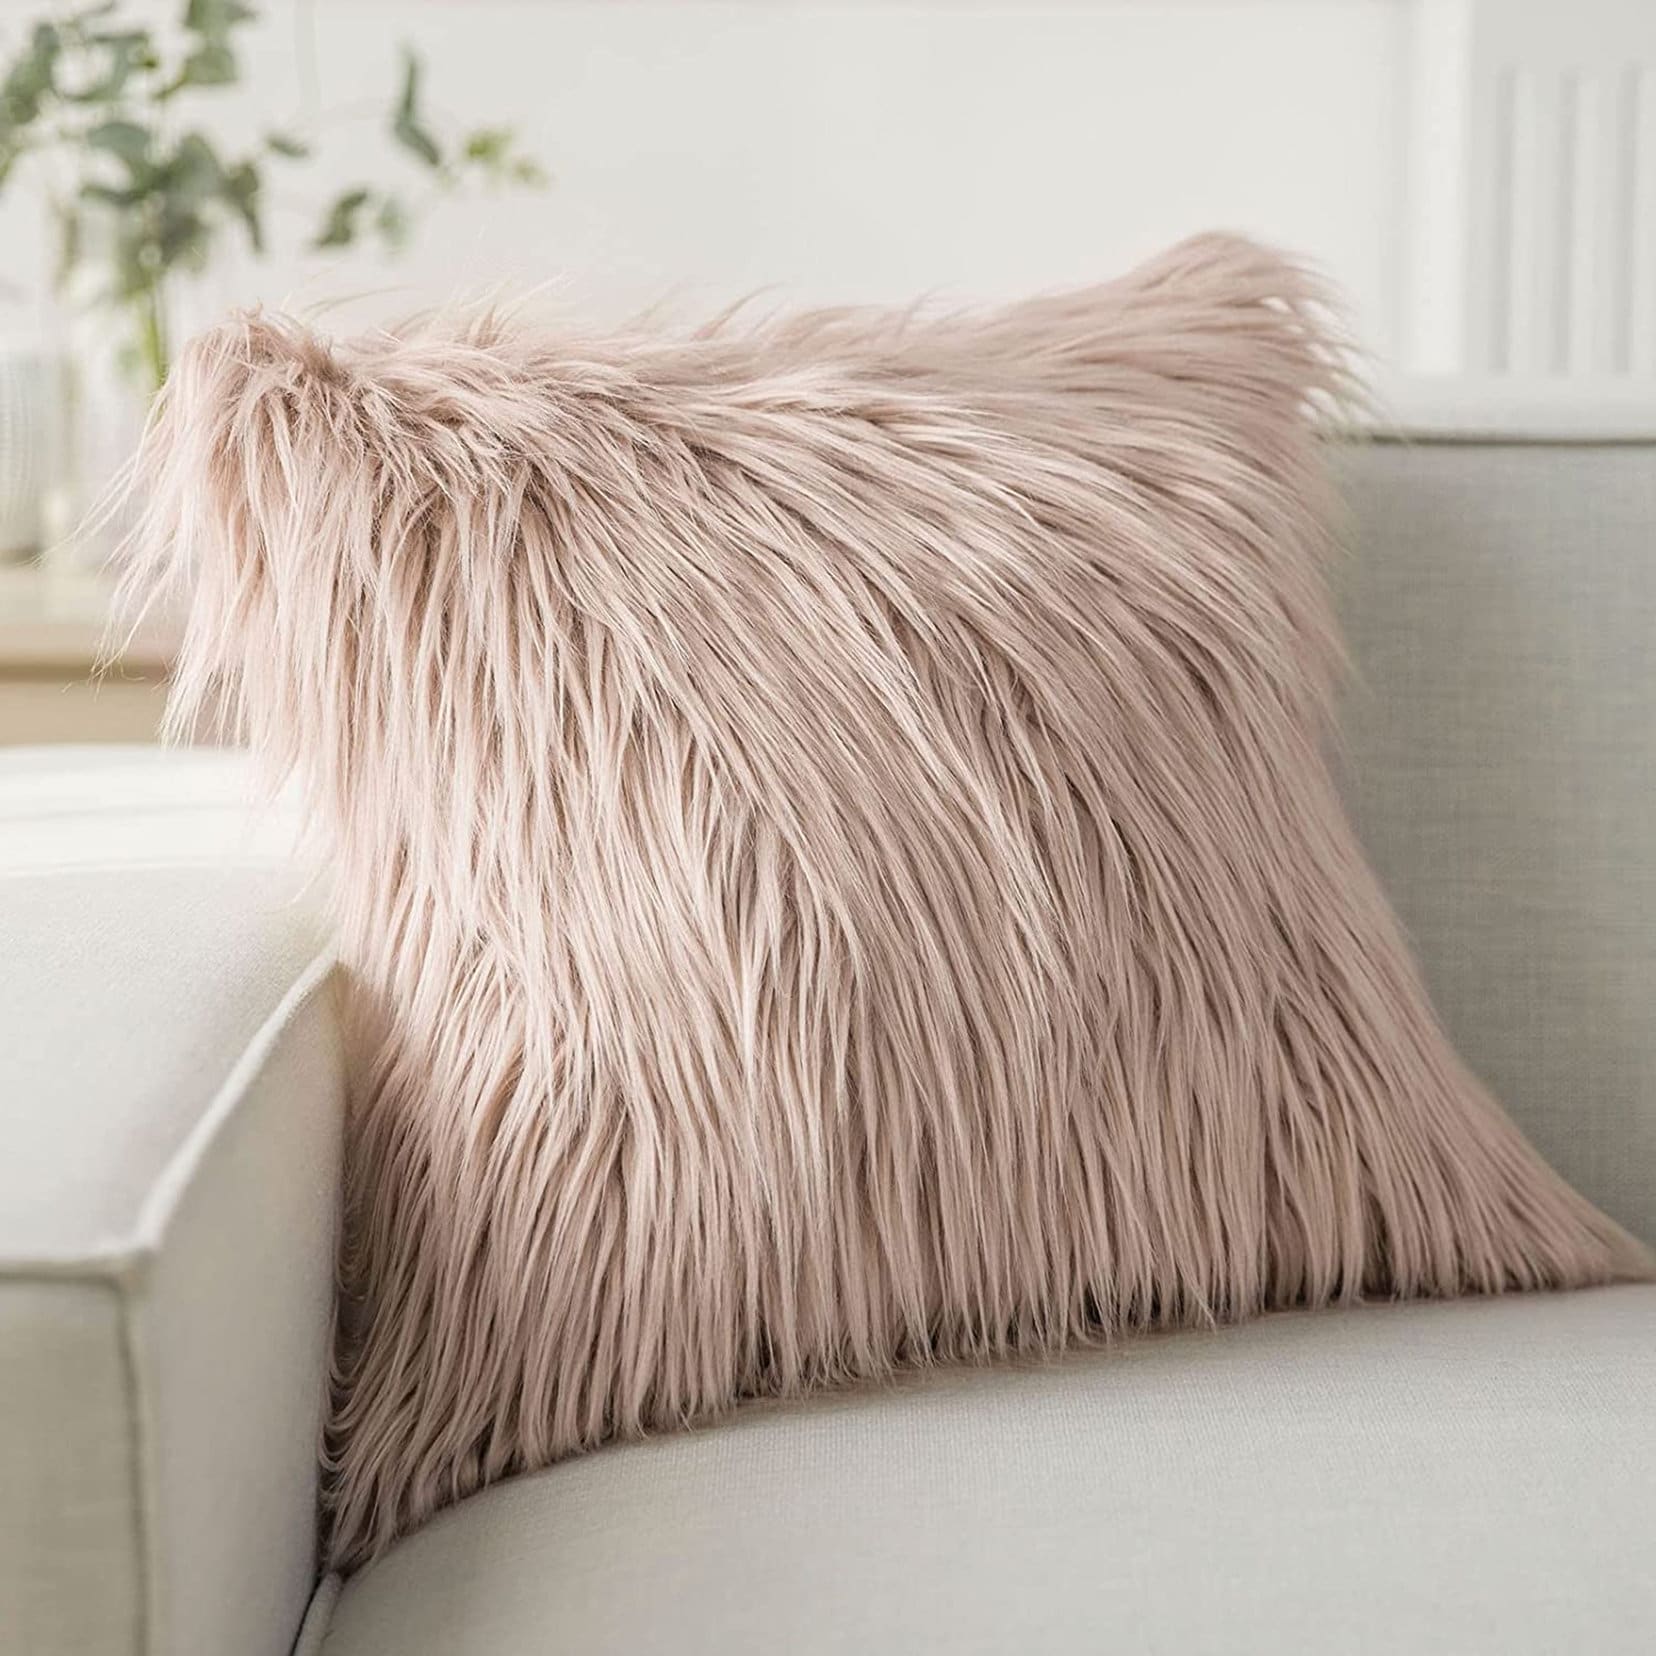 Fuzzy Oversized Throw Pillow - Shag Faux Fur Glam Decor - Plush Square  Accent or Floor Pillow for Bedroom, Living Room, or Dorm by Lavish Home  (Beige)